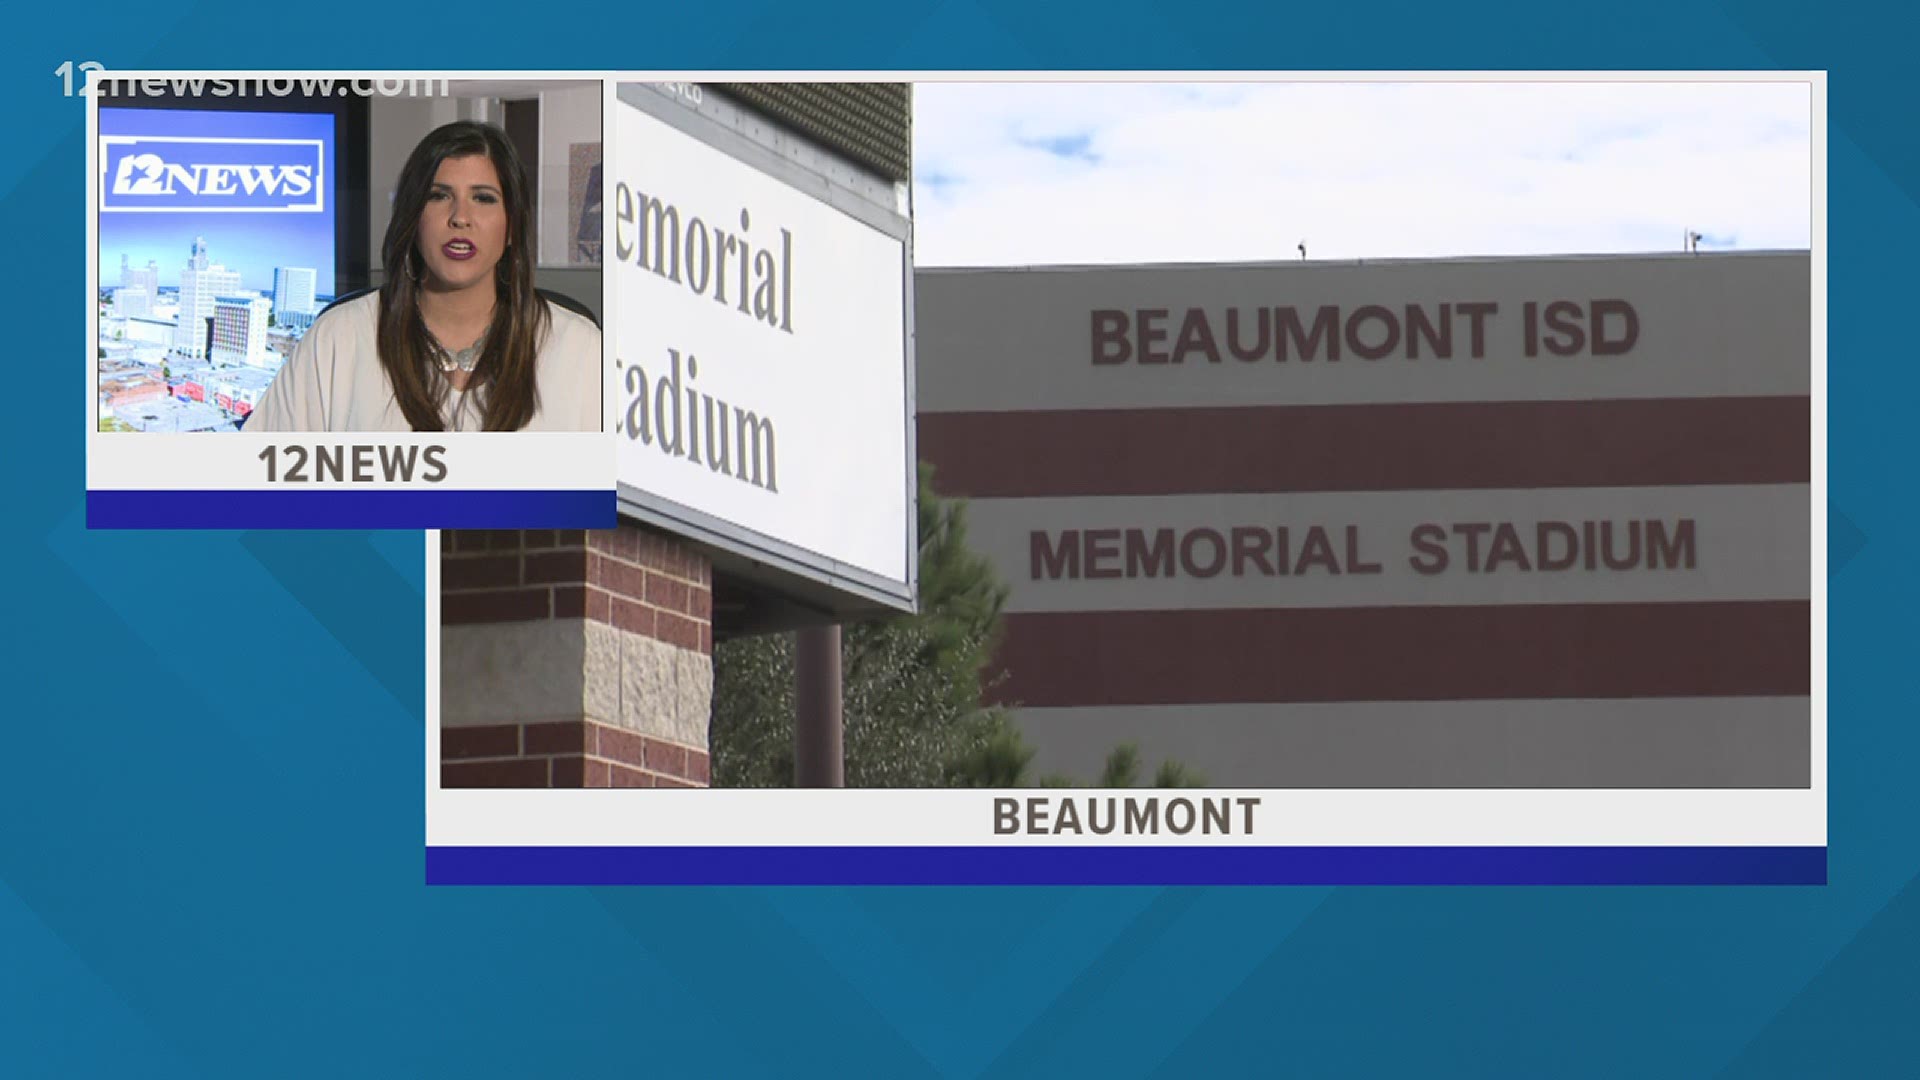 Beaumont ISD school board will consider conducting a community vote about the name of Memorial Stadium. Last week, the motion to rename it failed 5-2.